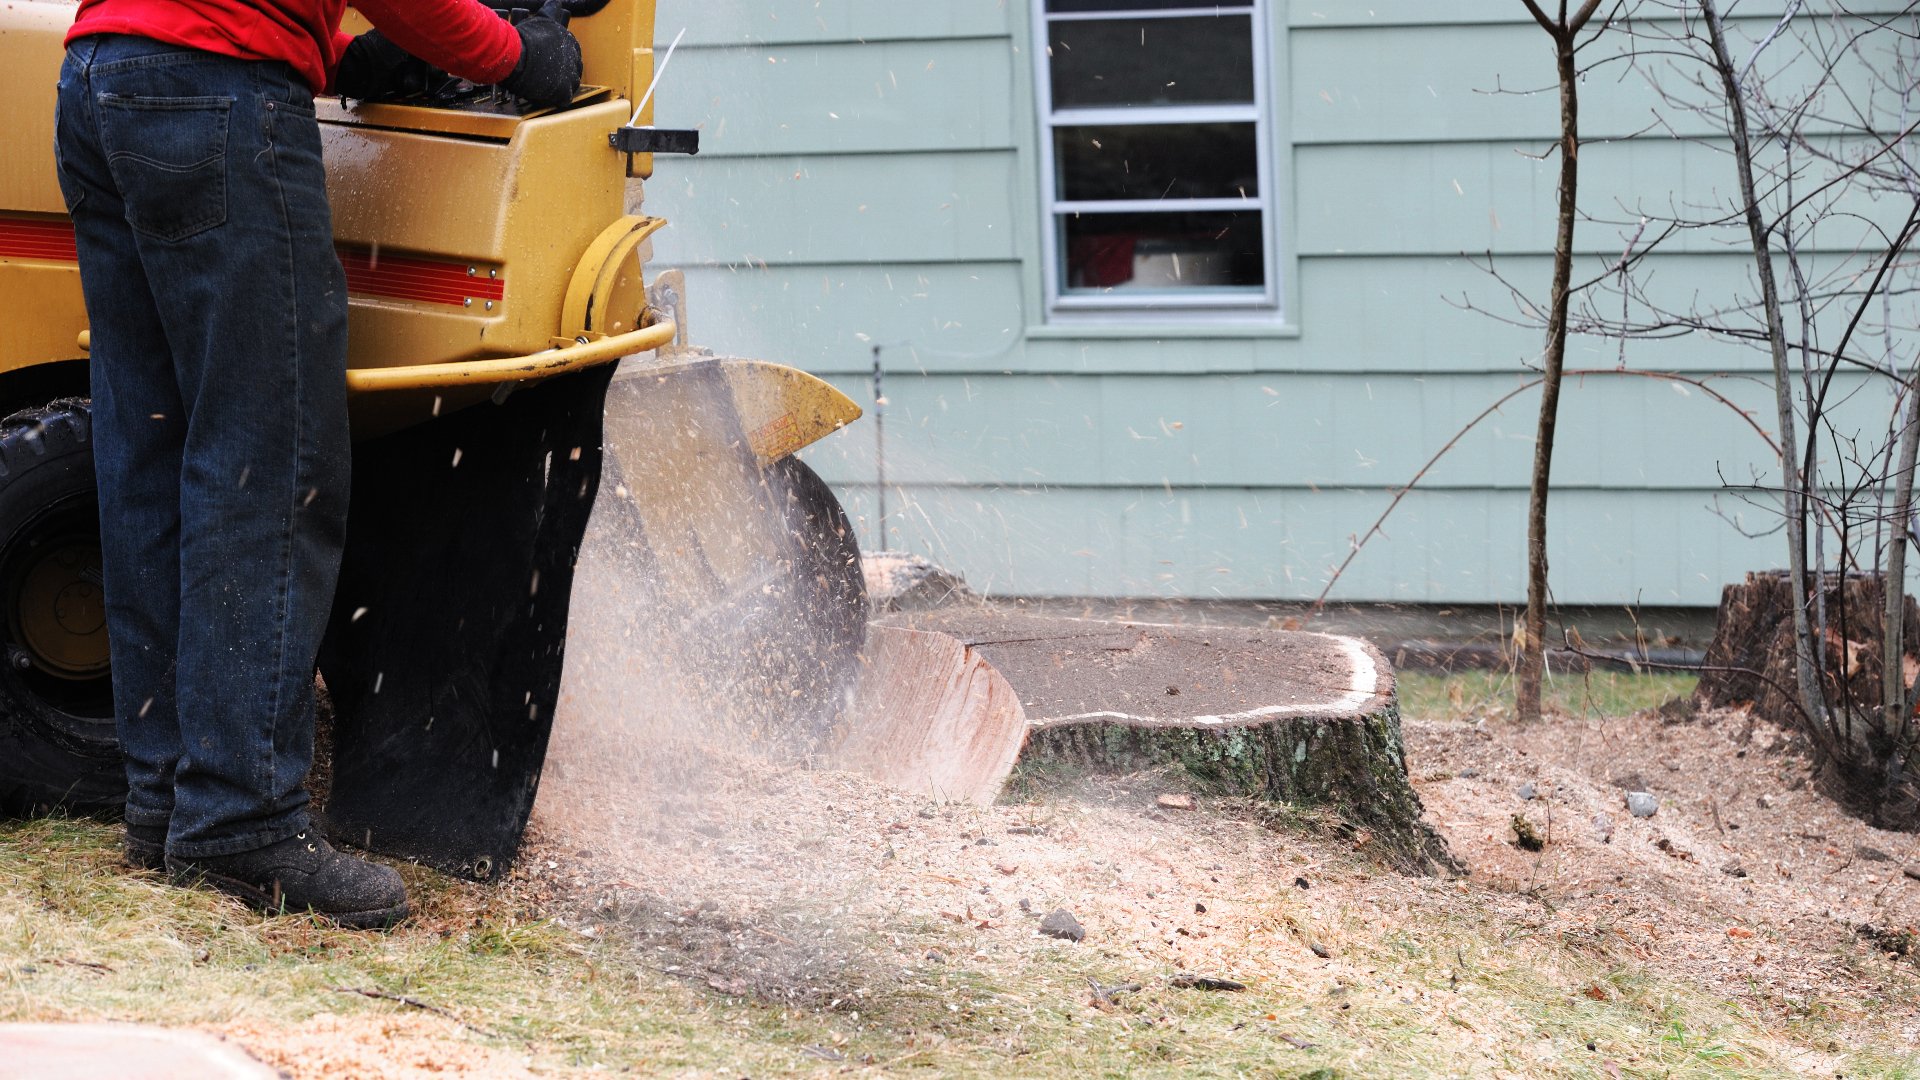 Should I Invest in Stump Grinding or Let My Stump Decompose on Its Own?